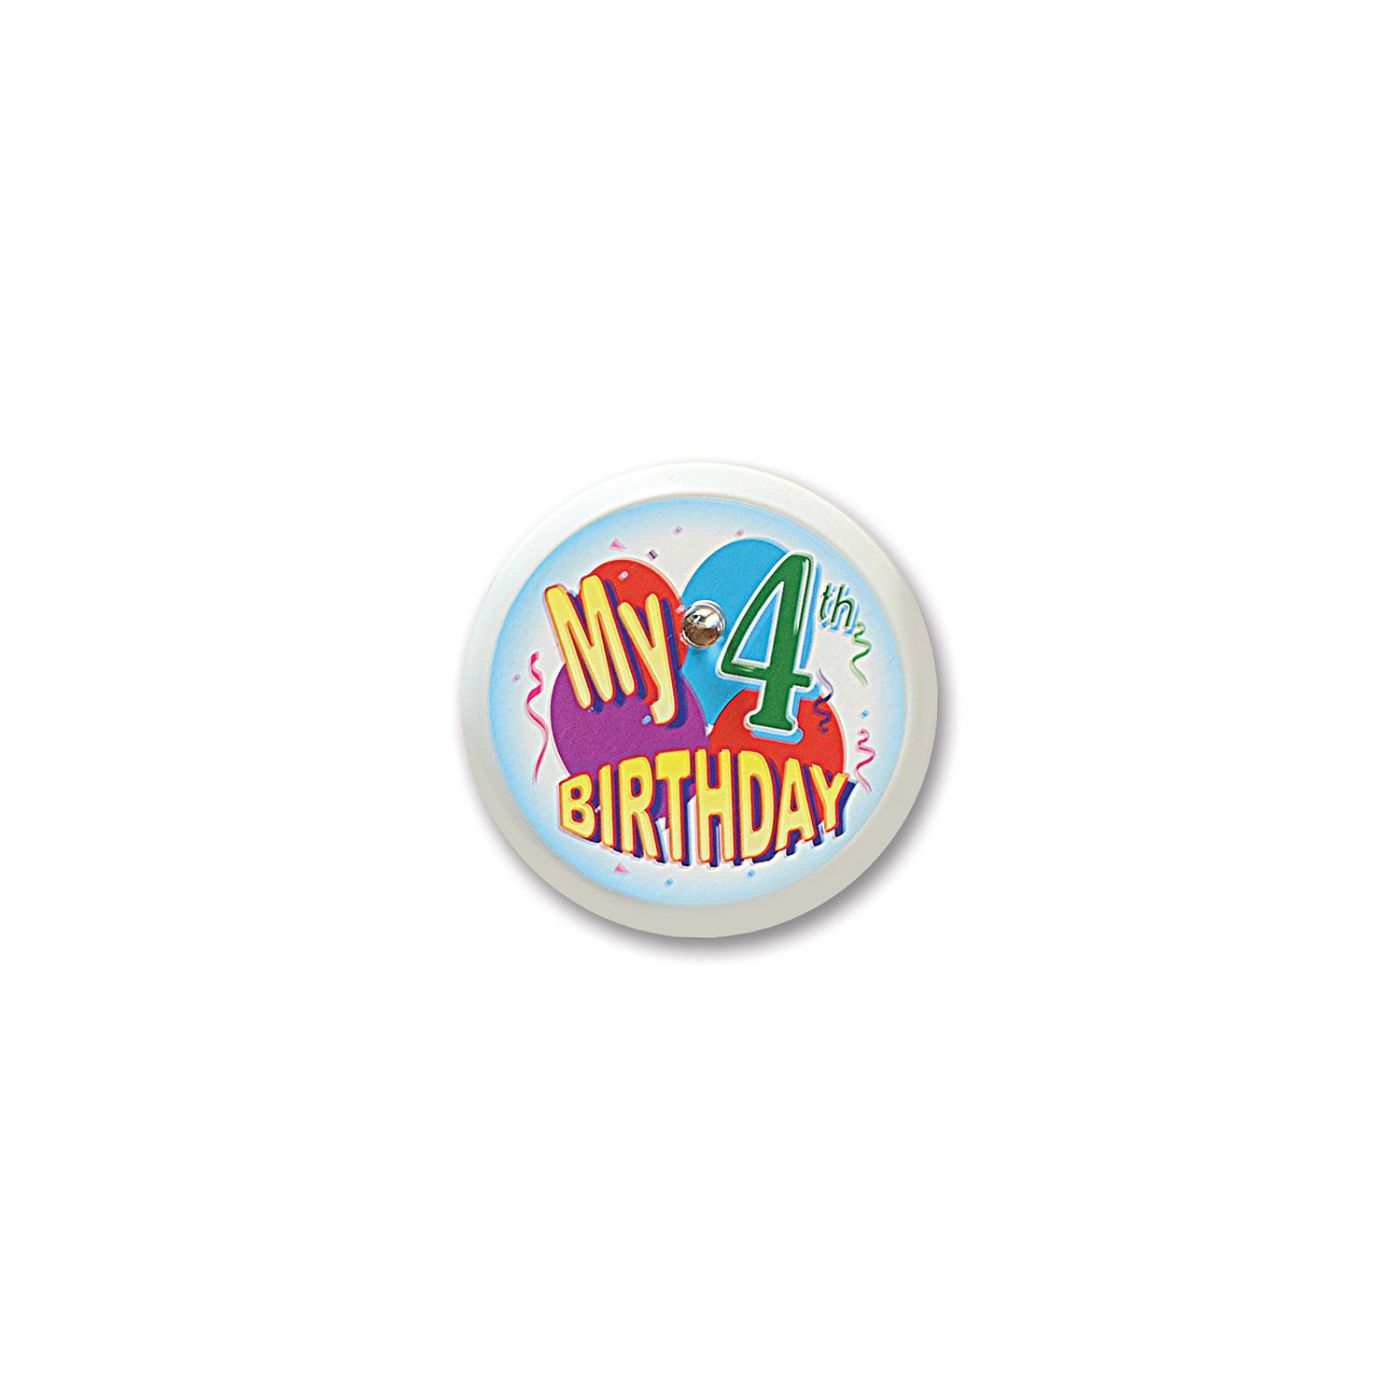 My 4th Birthday Blinking Button (6) image